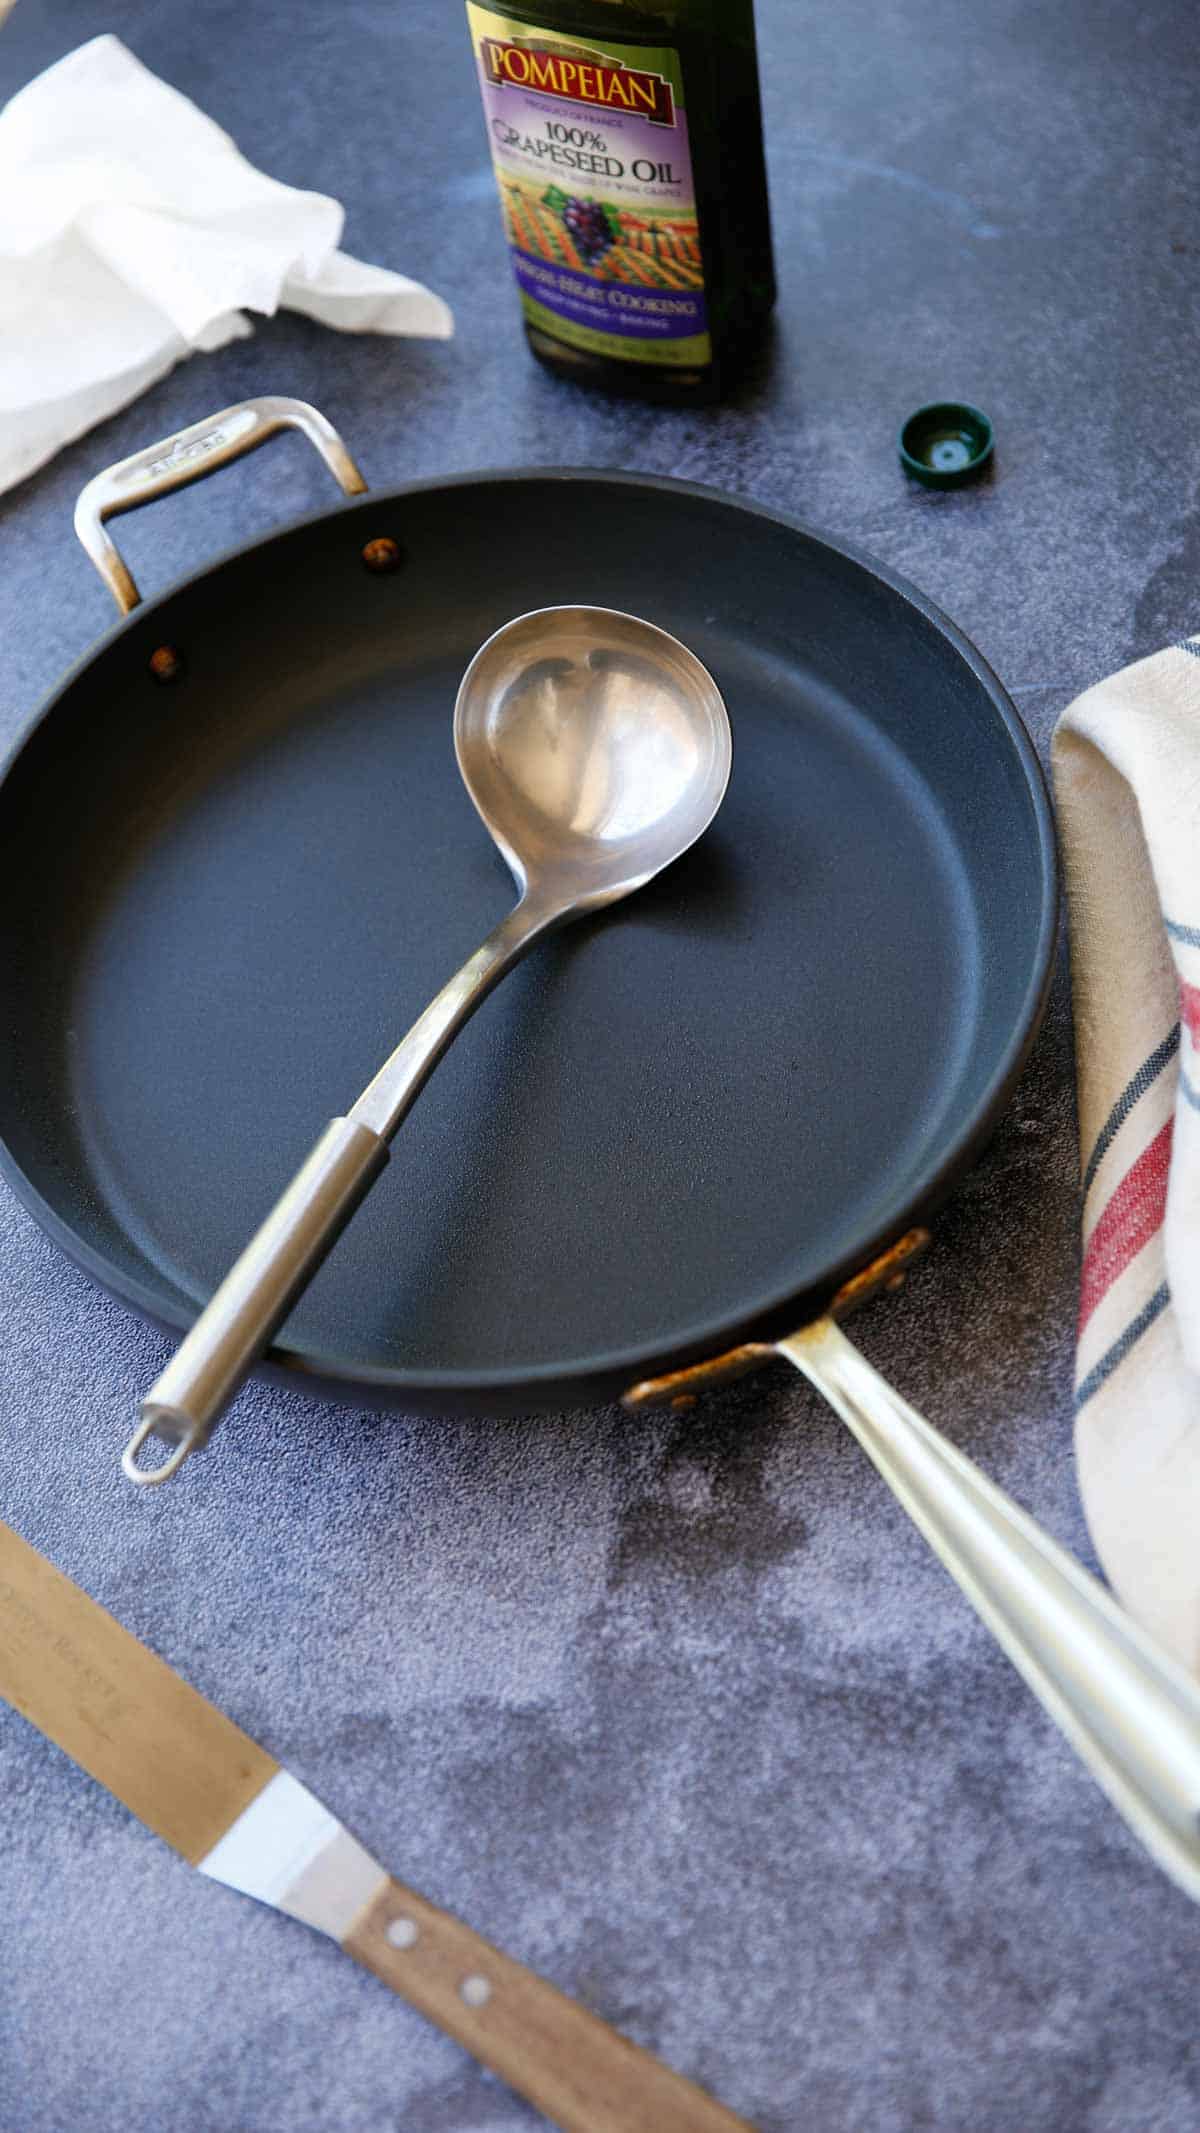 12 Inch Non Stick Skillet with ladle, spatula and grapeseed oil